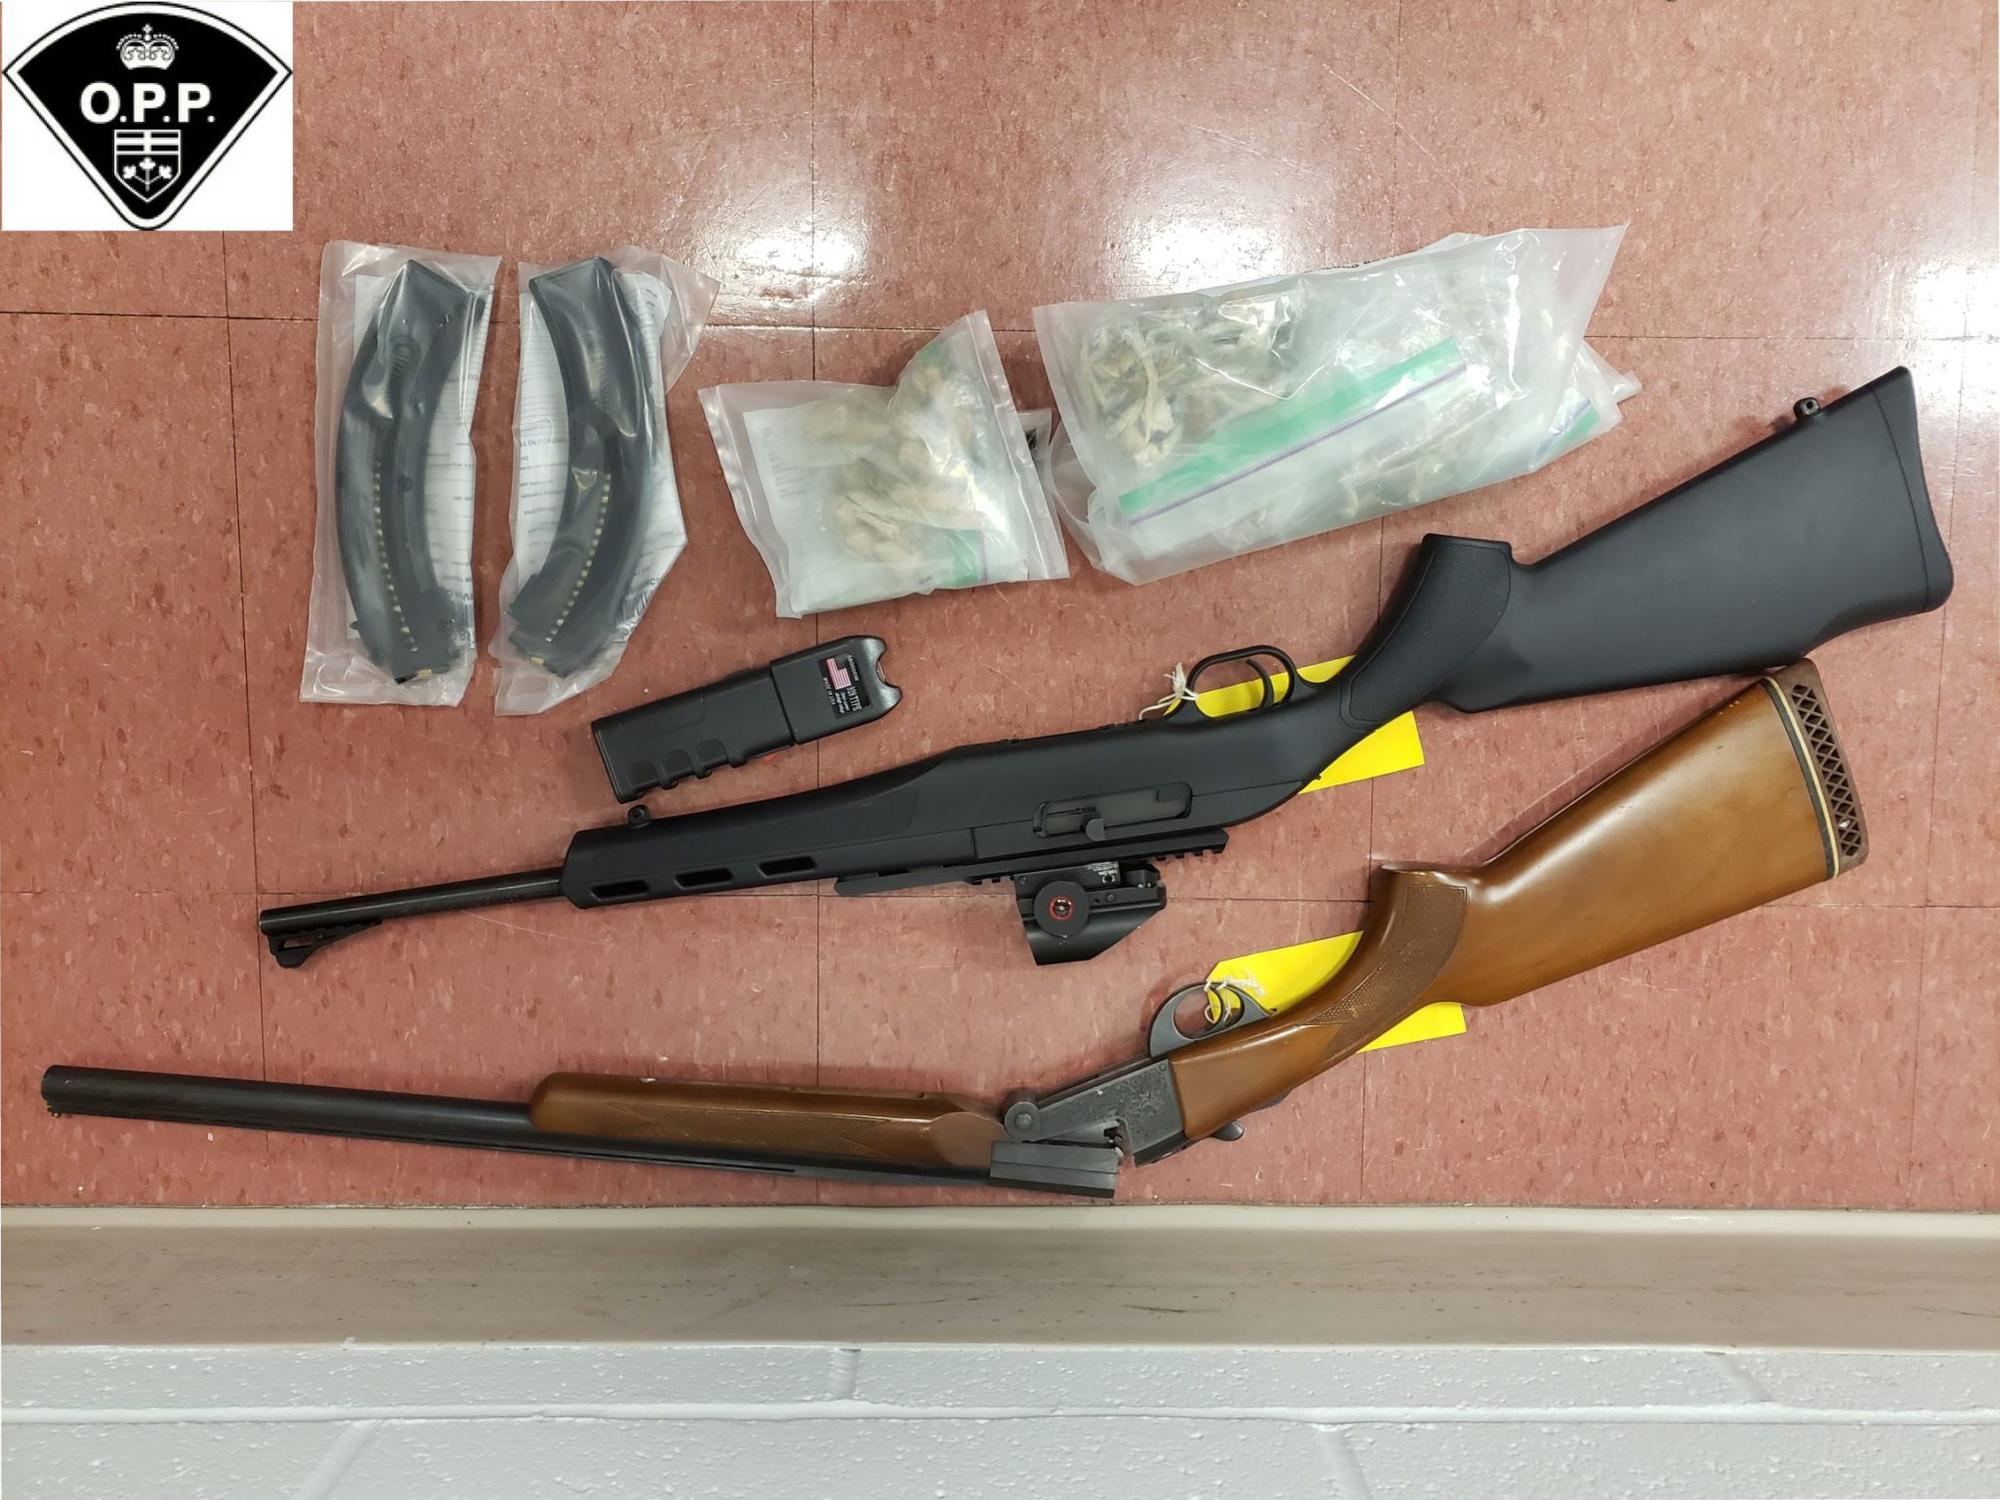 Man arrested in connection with possession of prohibited weapon